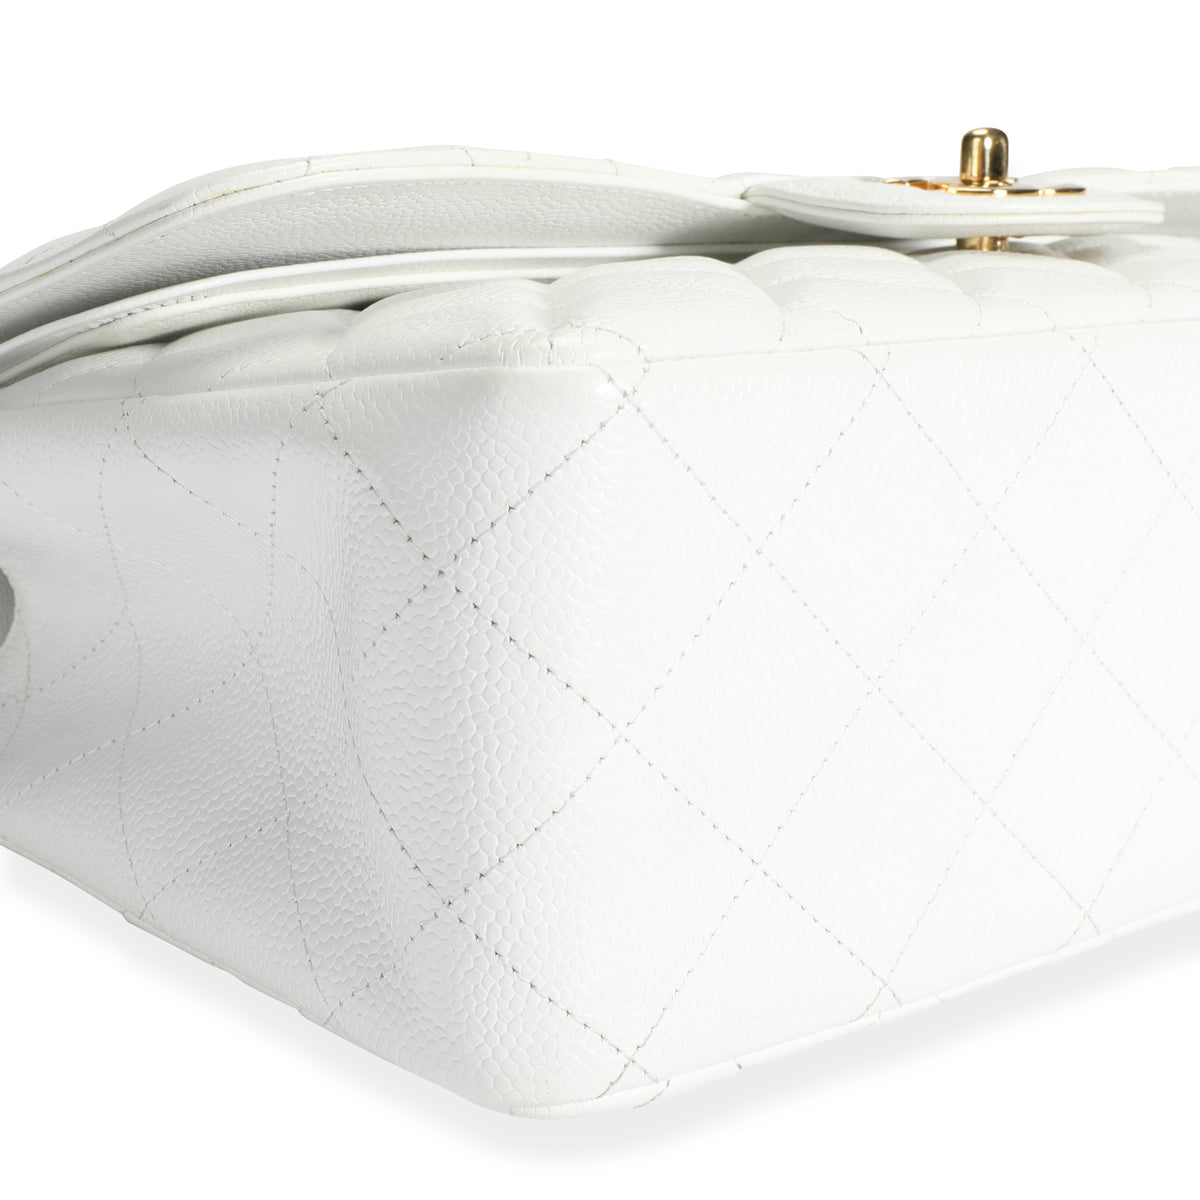 Chanel White Caviar Quilted Classic Jumbo Double Flap Bag by WP Diamonds –  myGemma